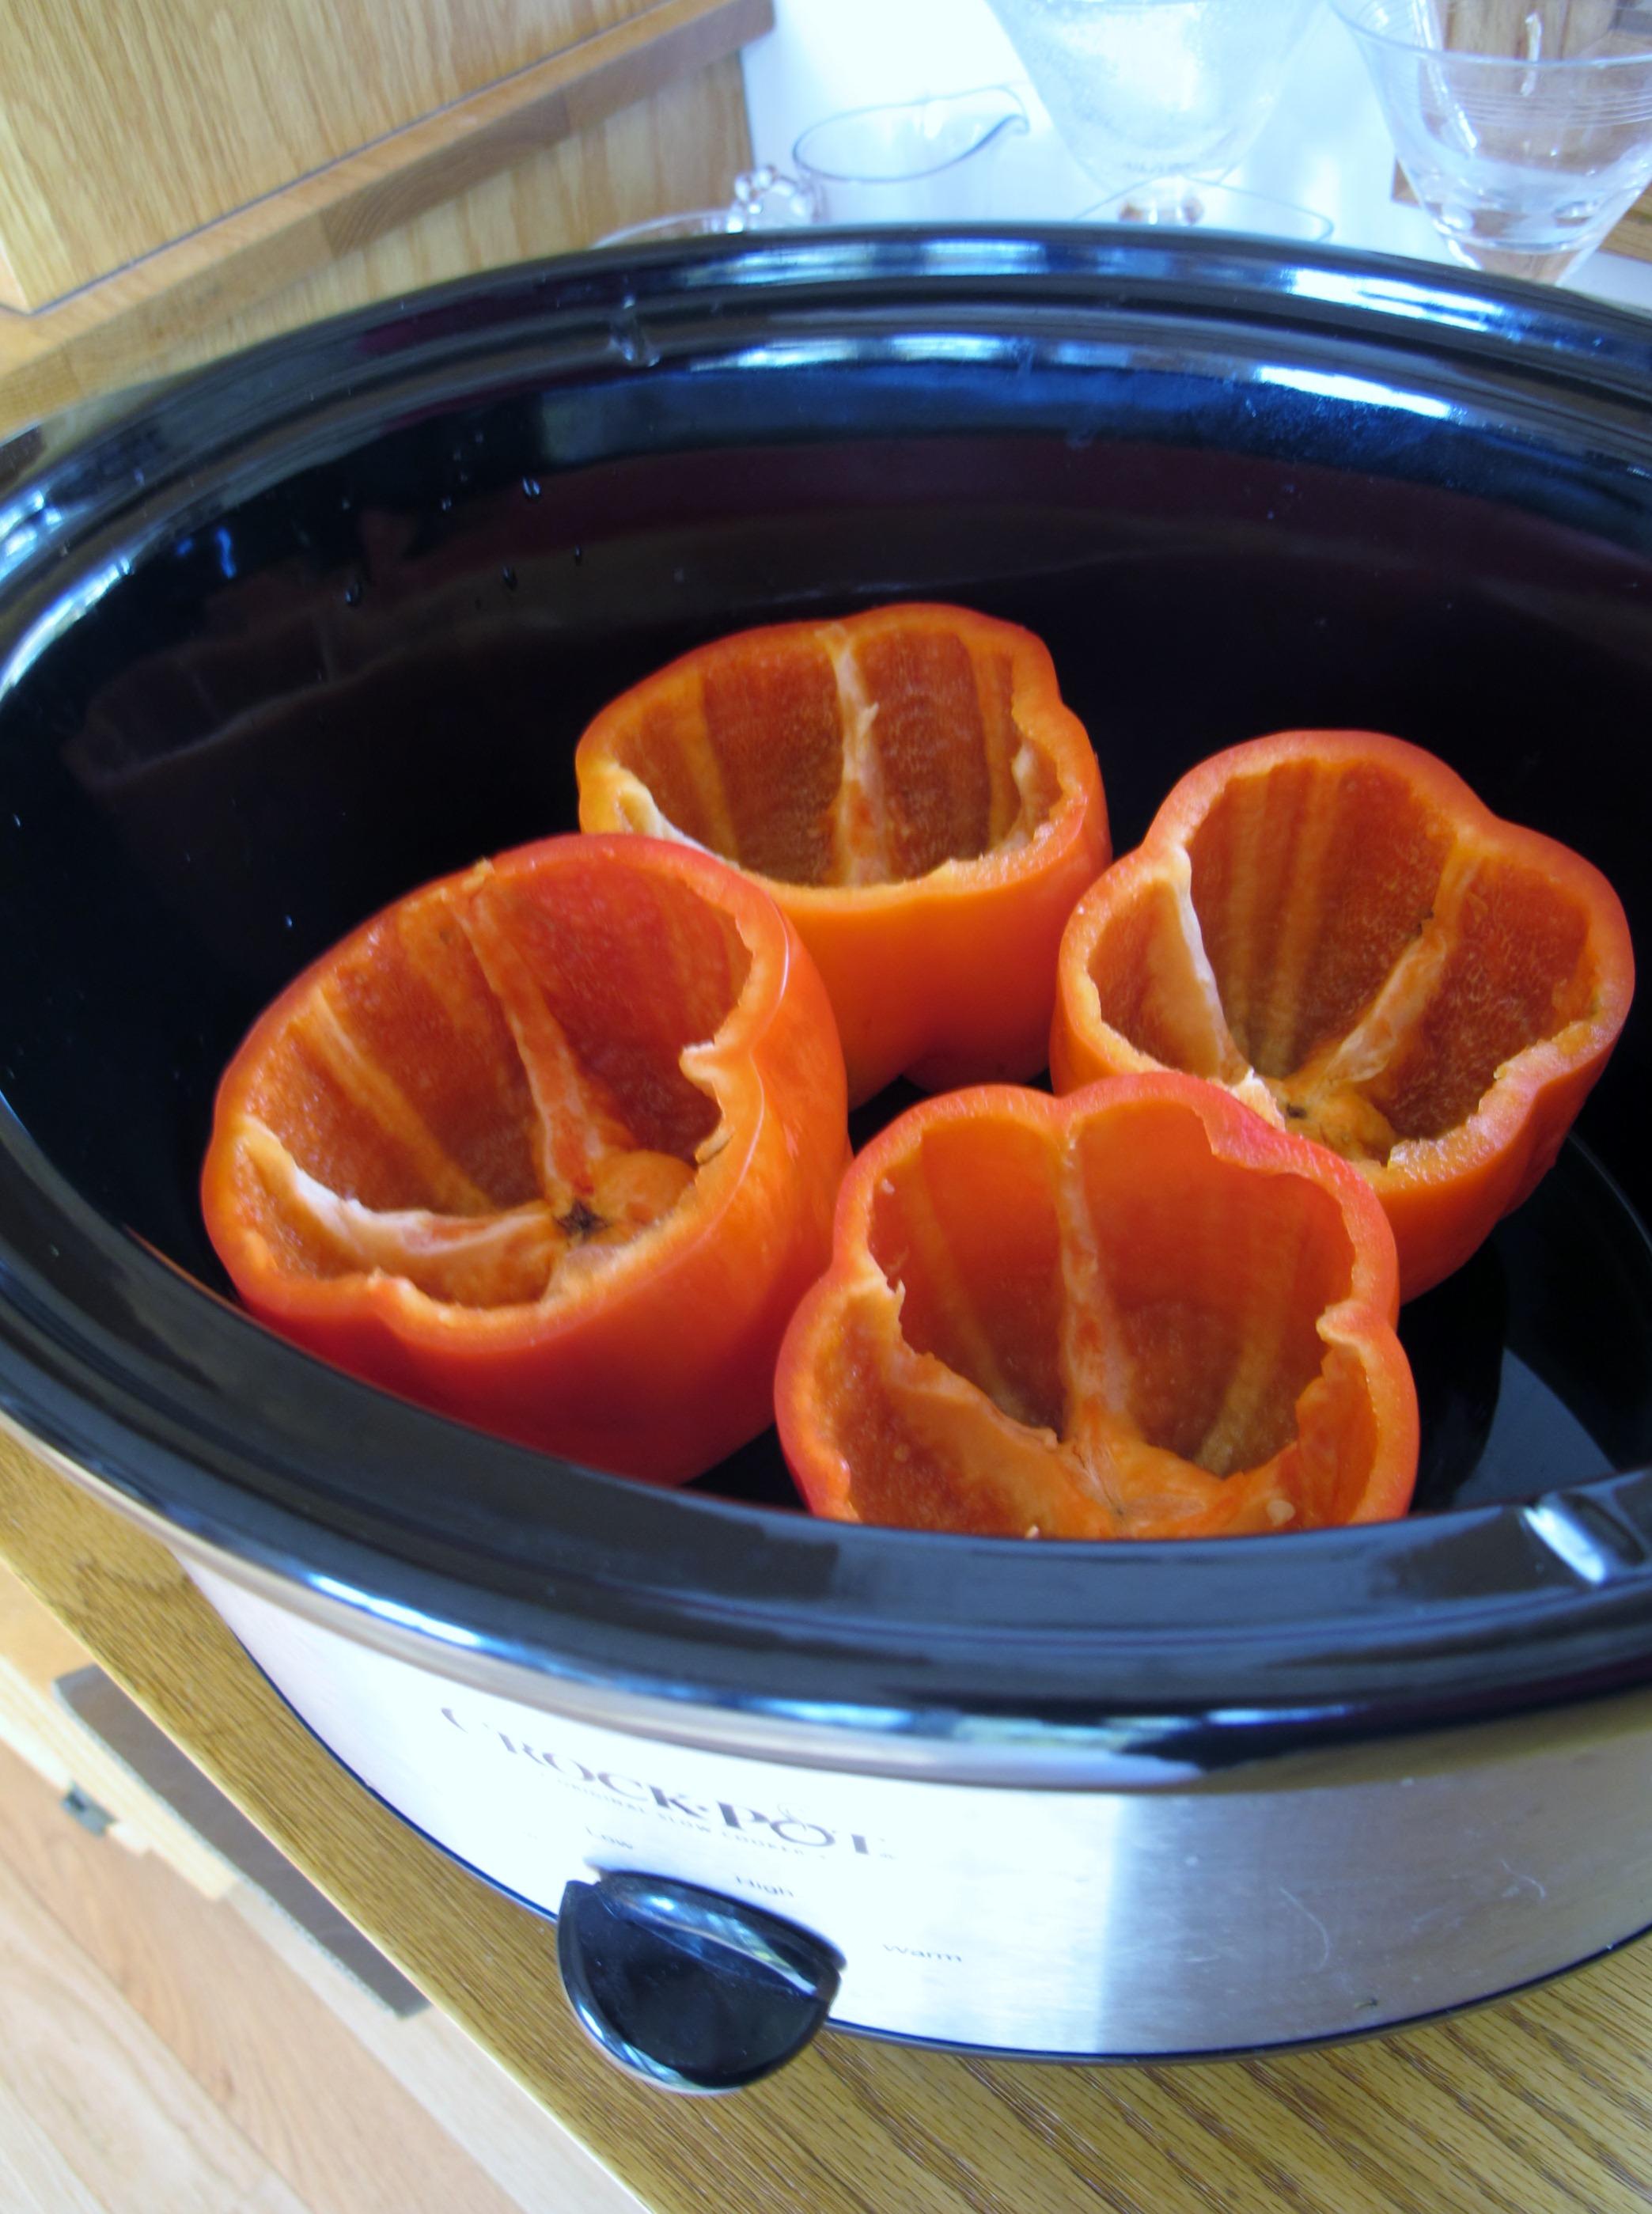 Red bell eppers in crock pot ready for stuffing